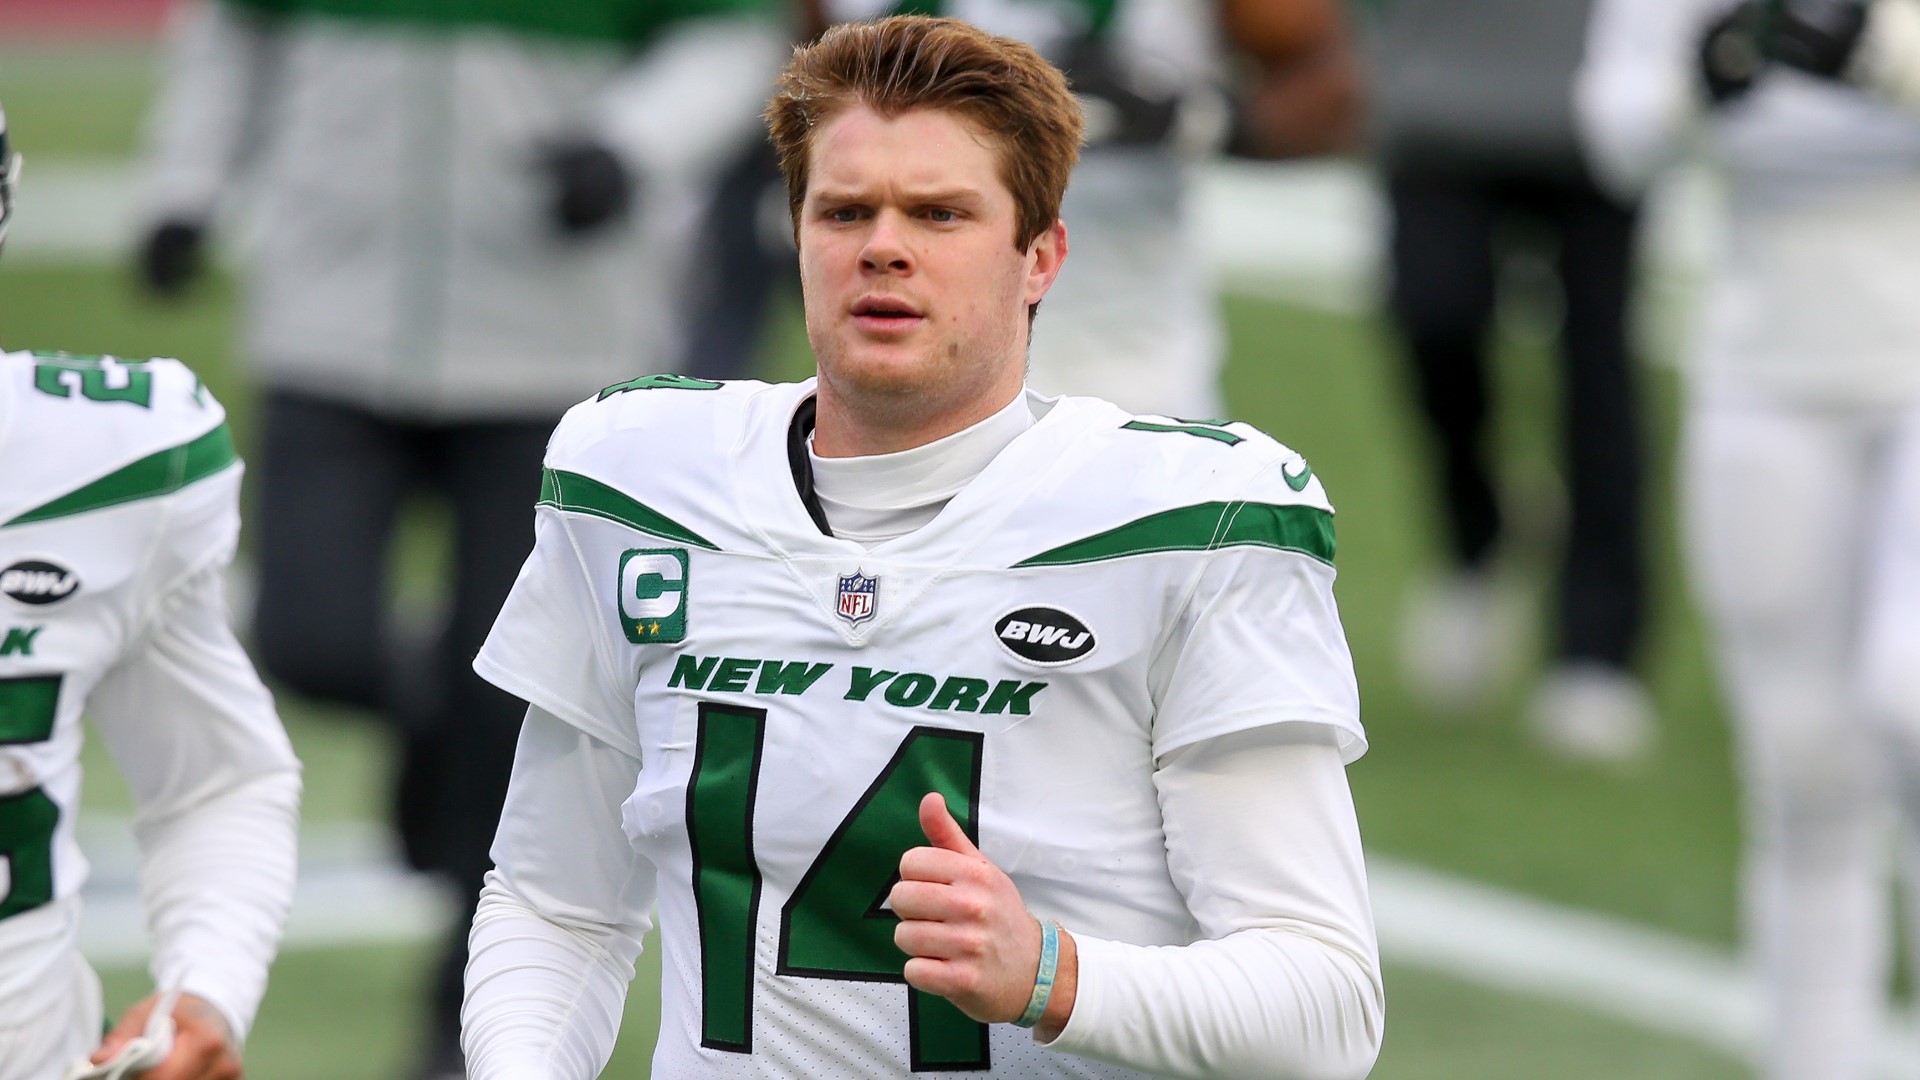 The Carolina Panthers just announced that they have traded for quarterback Sam Darnold.